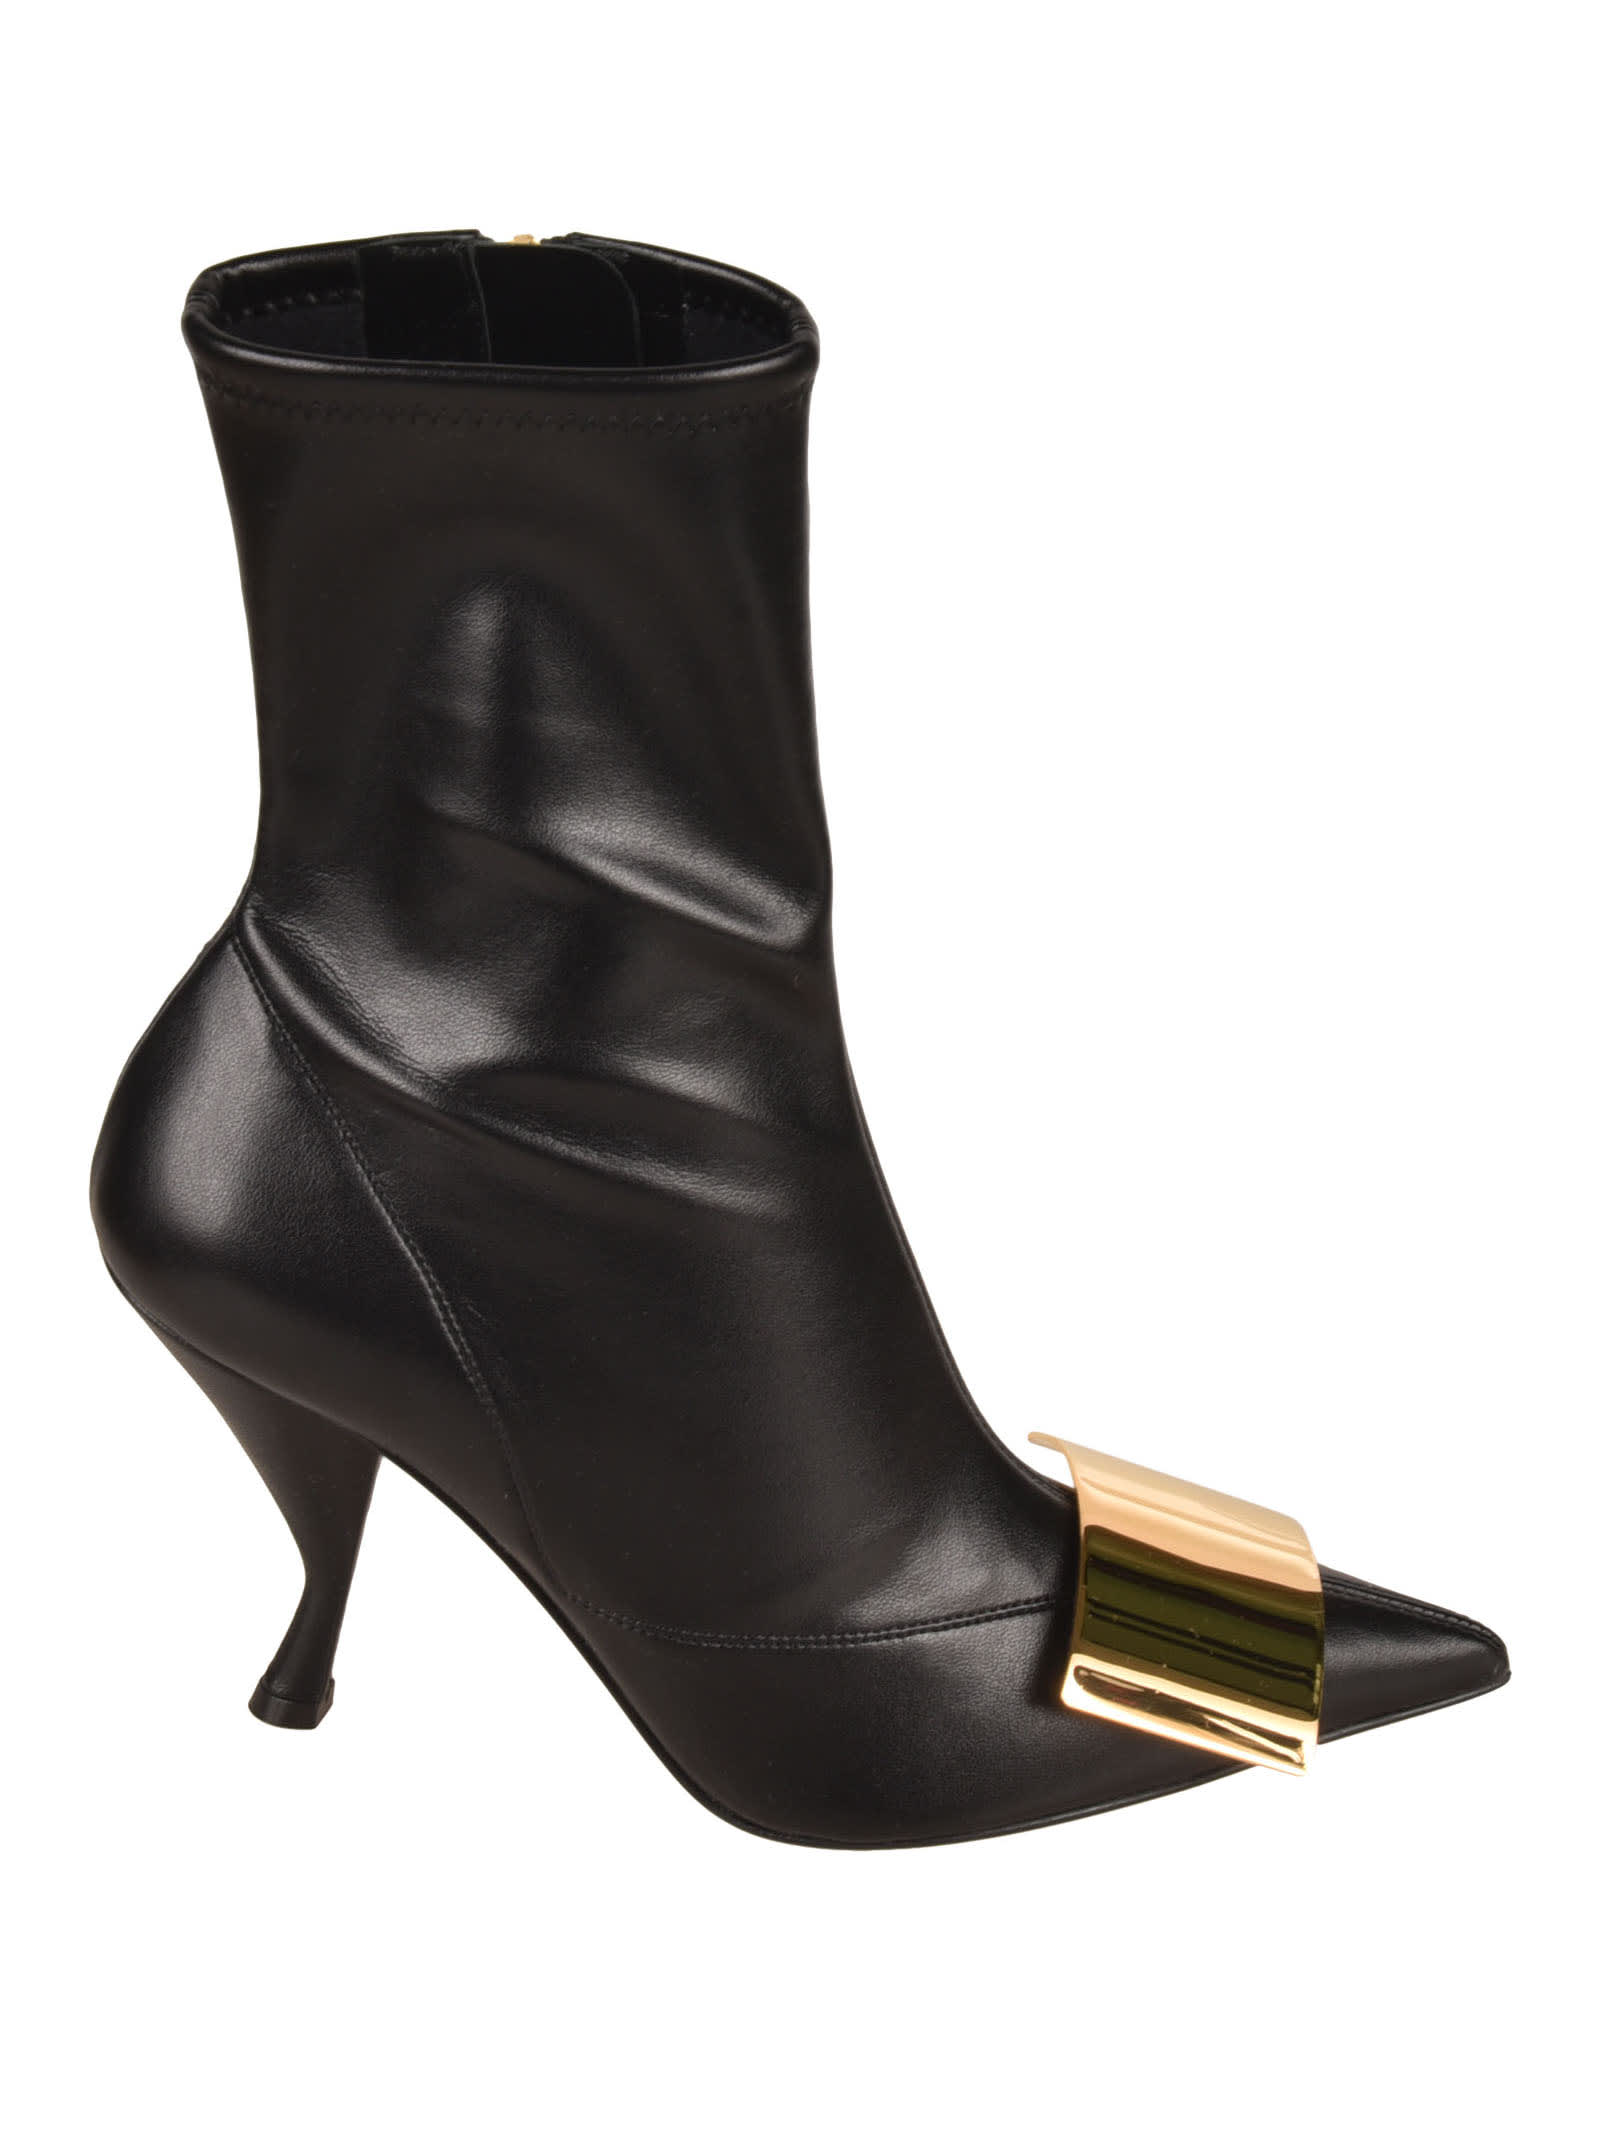 Sergio Rossi Pointed Toe Side Zip Boots